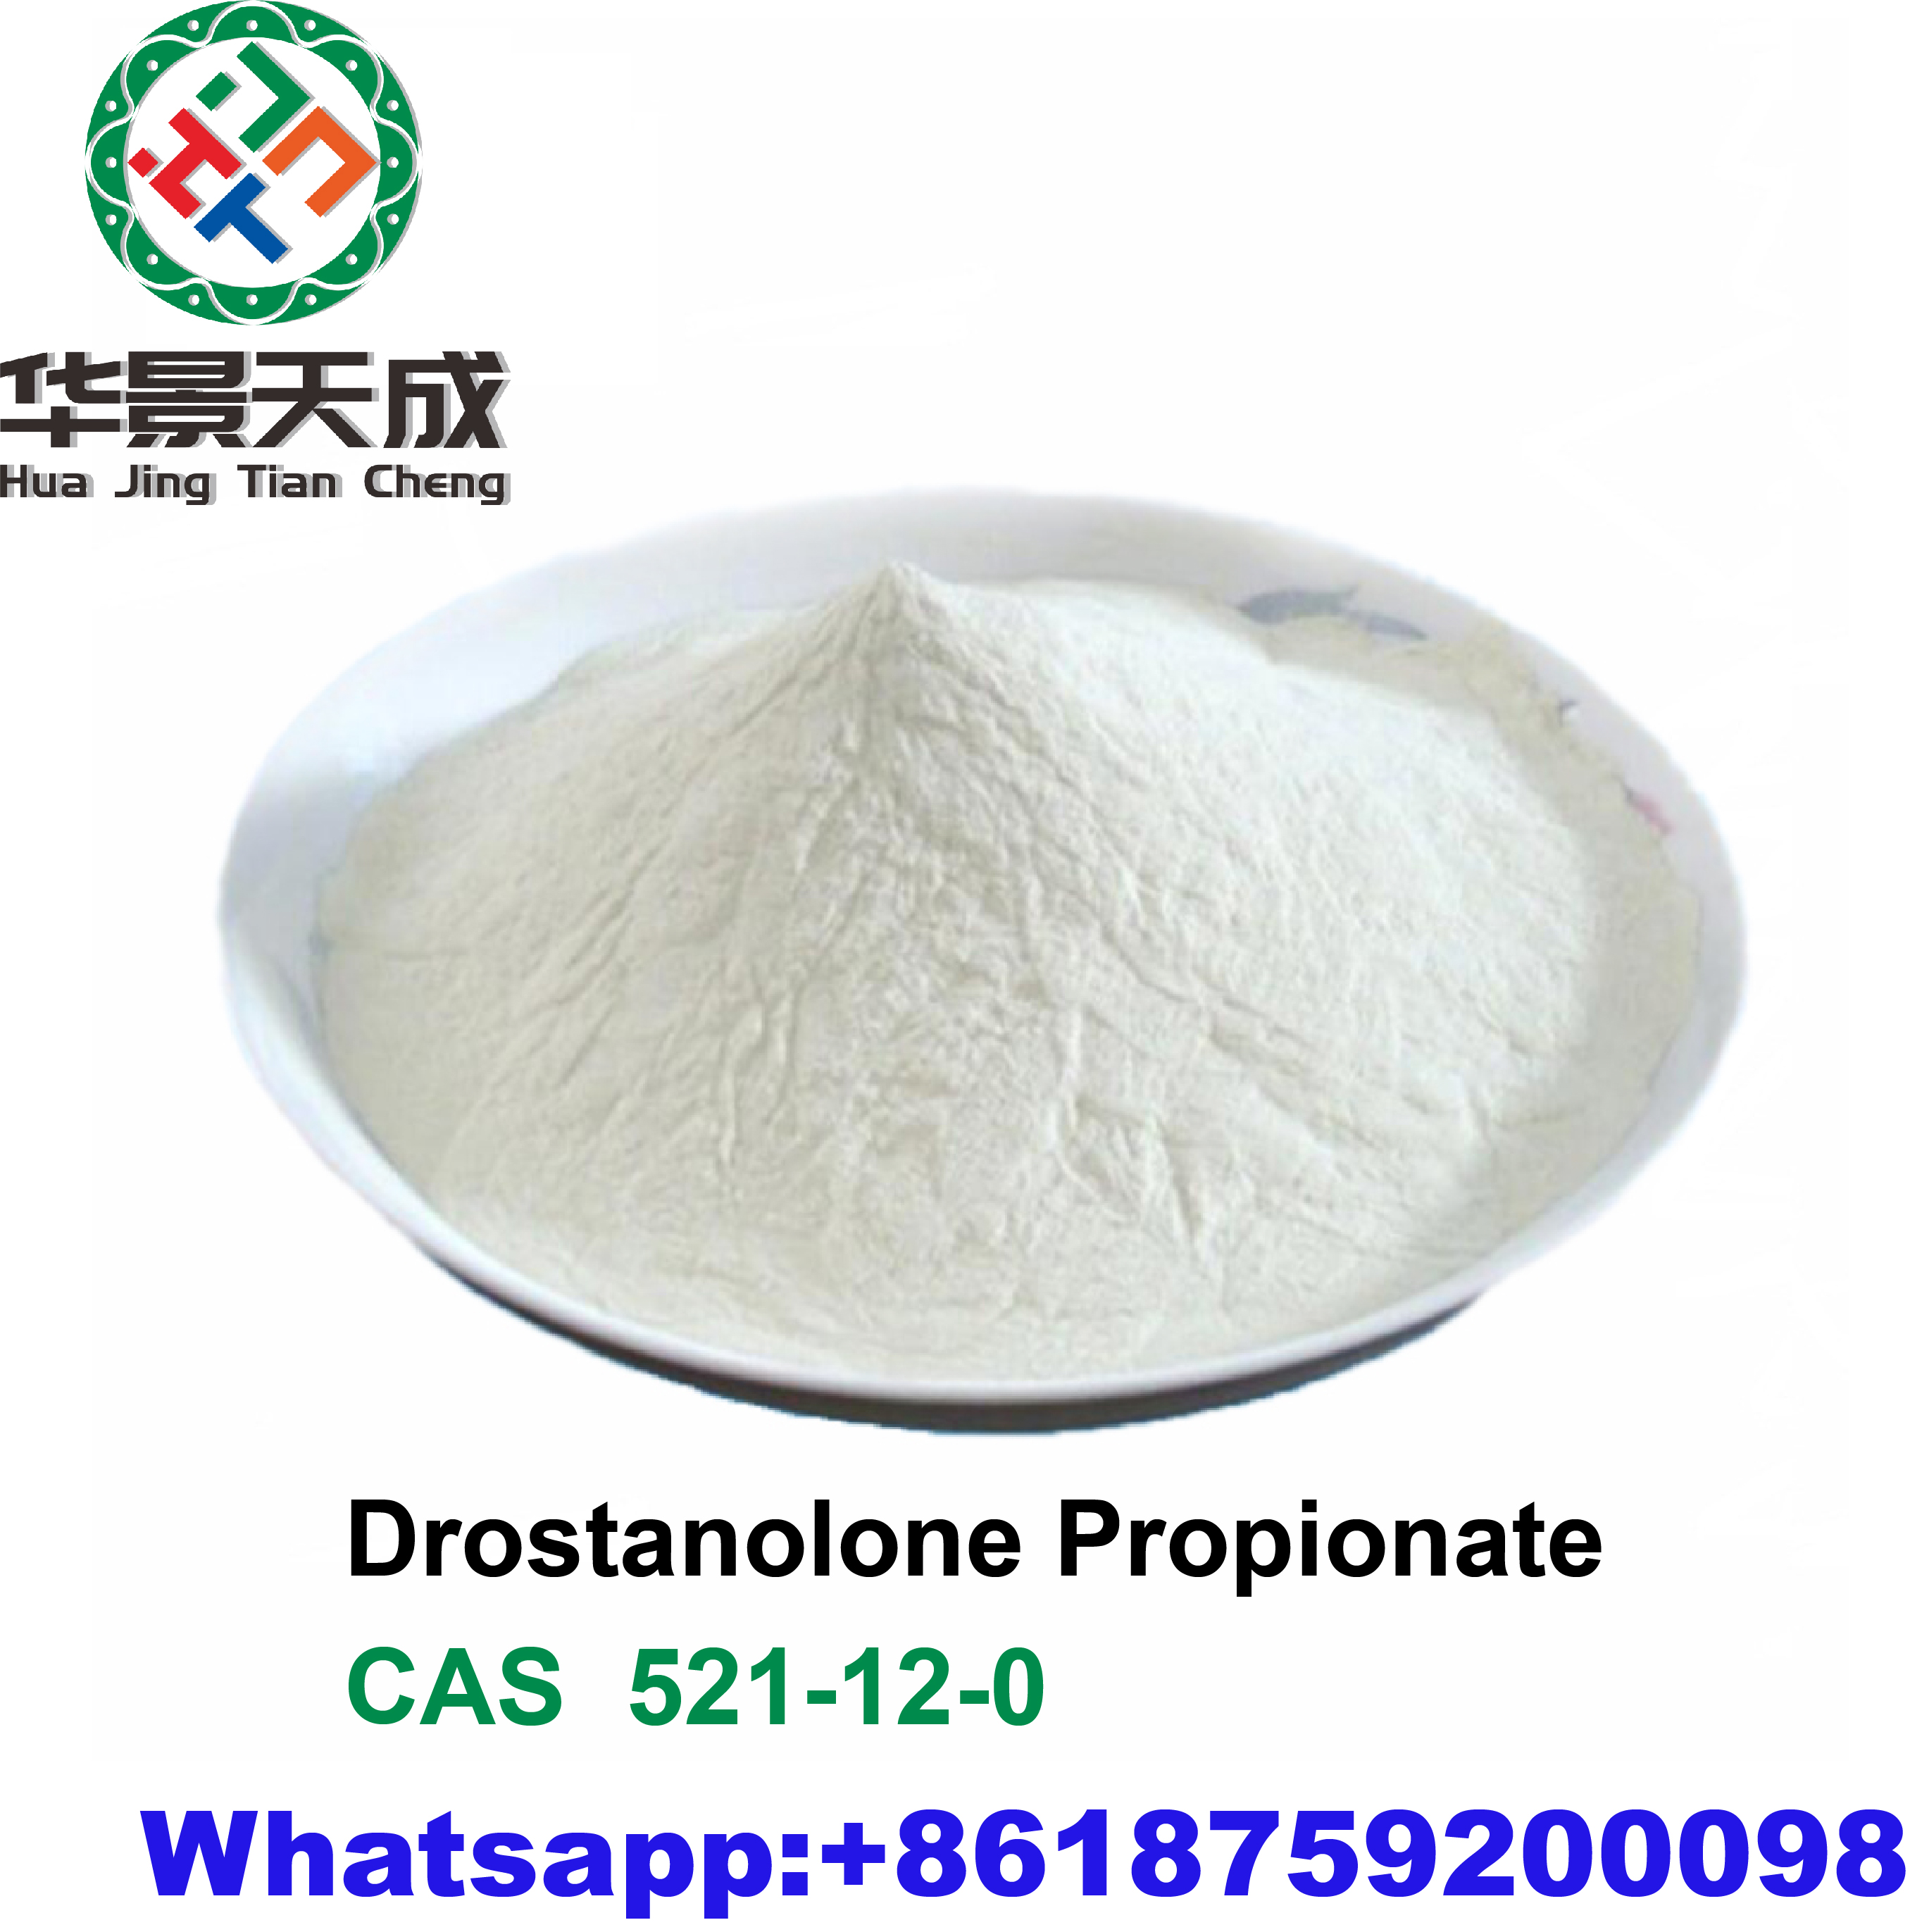 Healthy Drostanolone Propionate CasNO.521-12-0 Masteron P Steroid Anabolic Muscle Building Featured Image